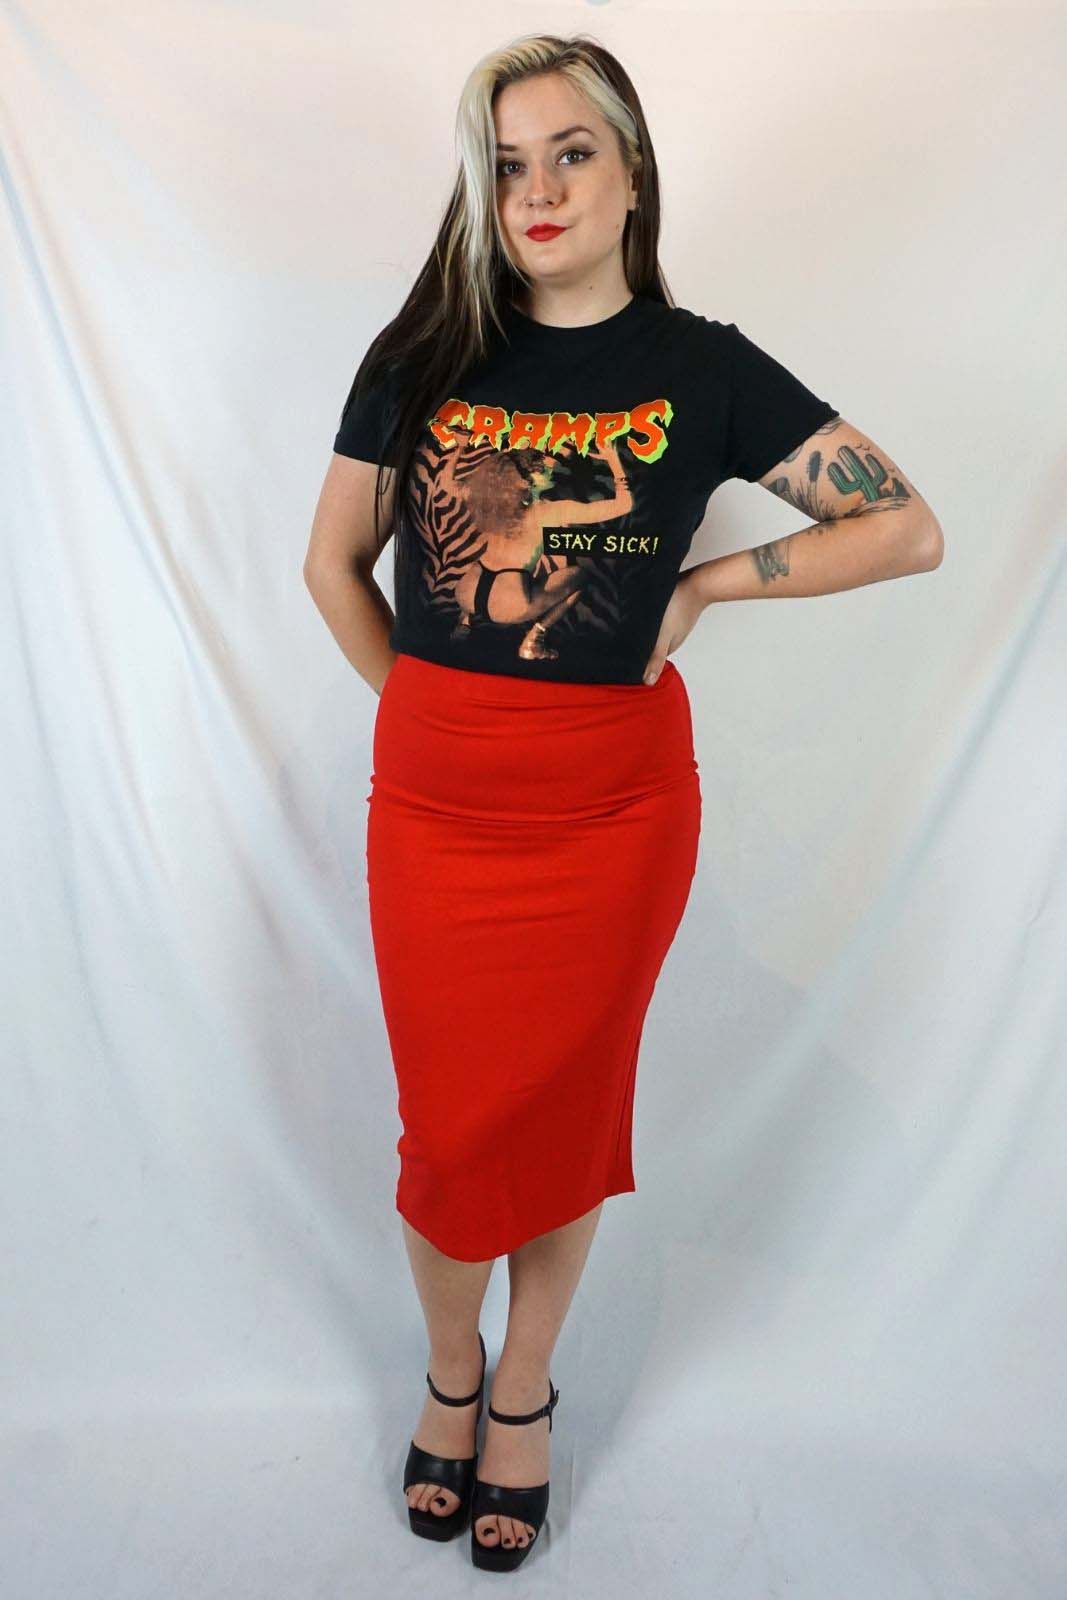 The Cramps Stay Sick Shirt